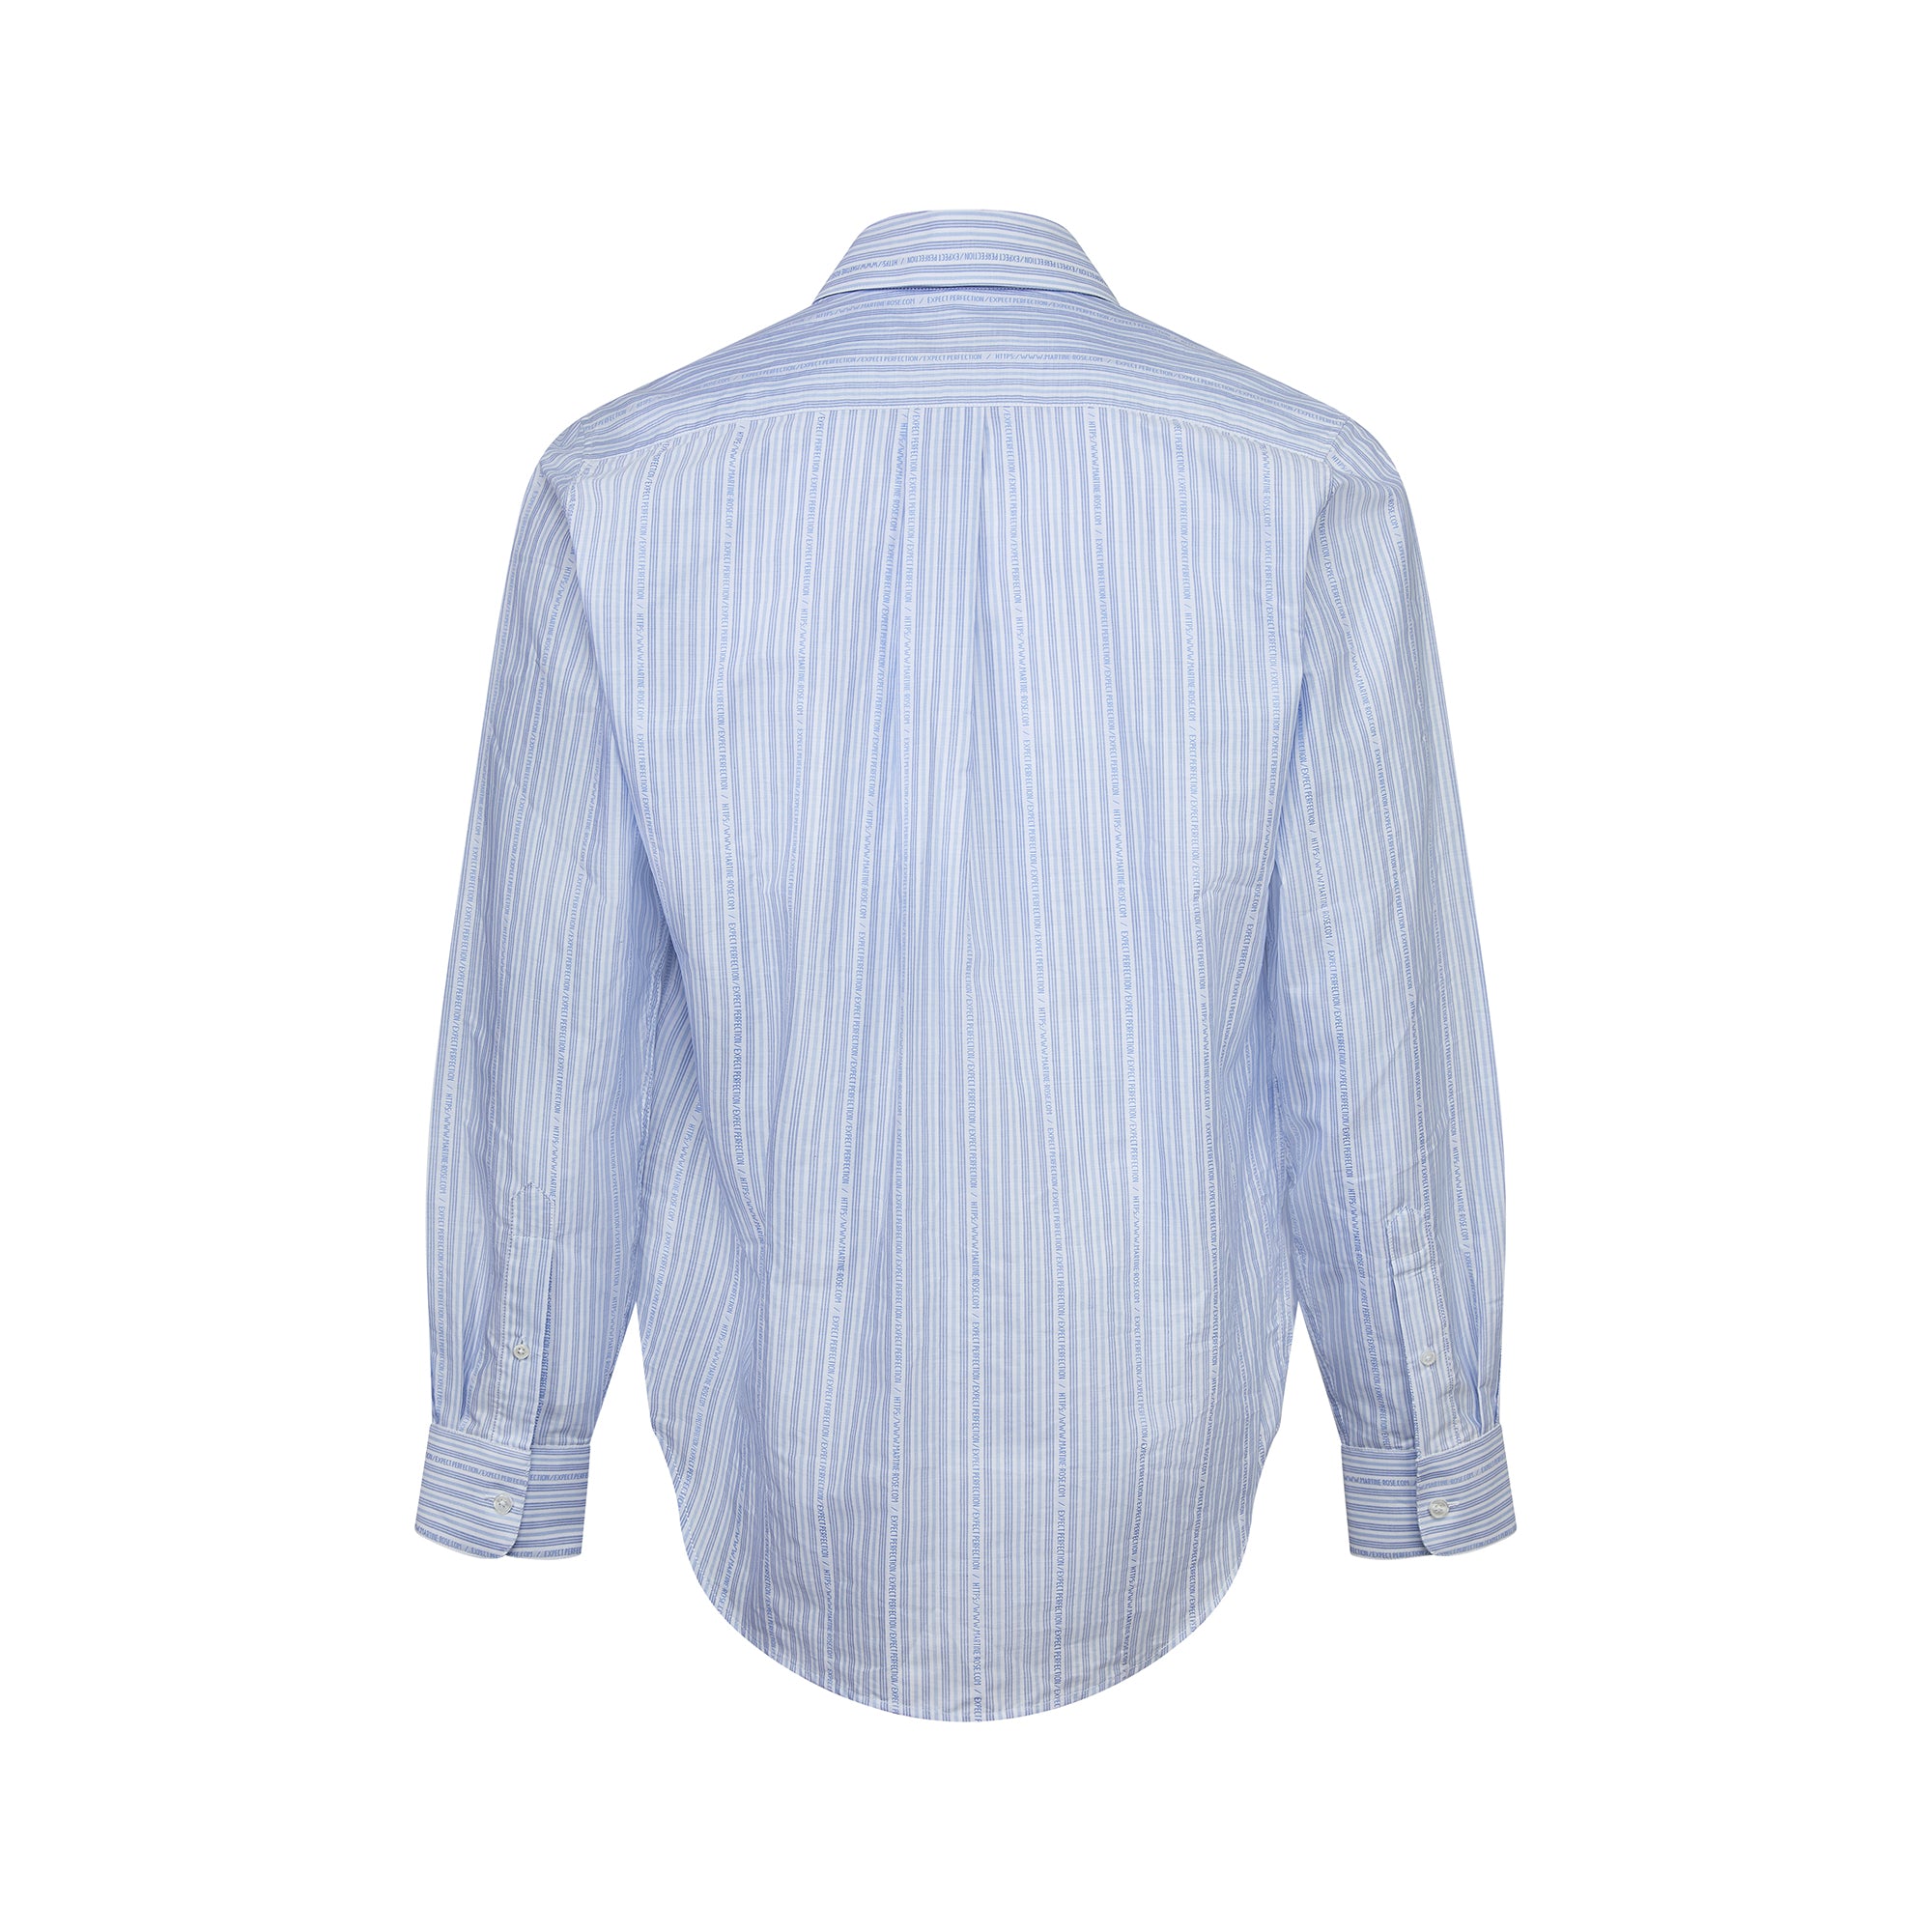 Martine Rose – Classic Short-Sleeve Button-Down Shirt Lilac and White  Stripe